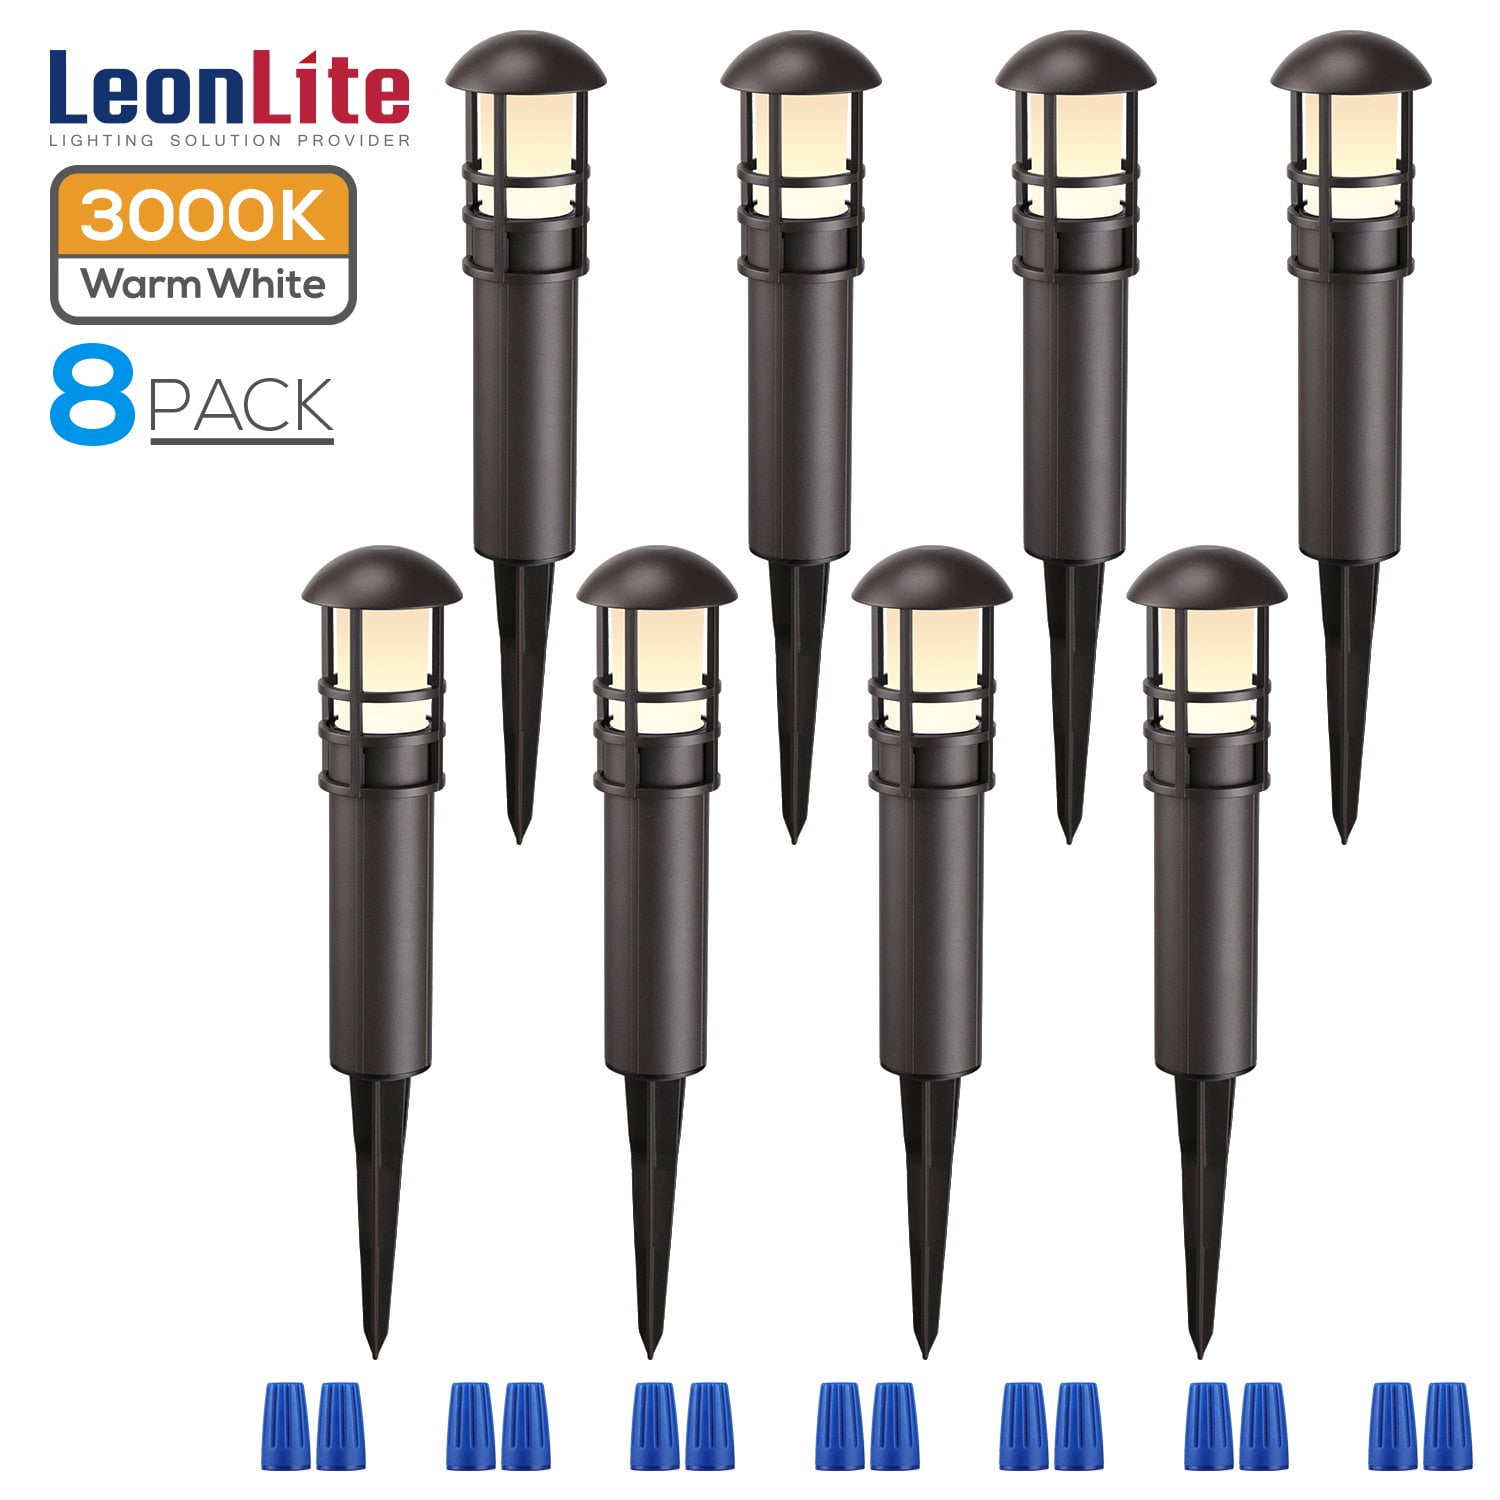 LEONLITE Pack 3W LED Landscape Light, Waterproof, 12V Low Voltage, 3000K  Warm White, Aluminum Housing with Ground Stake, Years Warranty, for Outdoor  Pathway, Lawn Path, Garden Yard